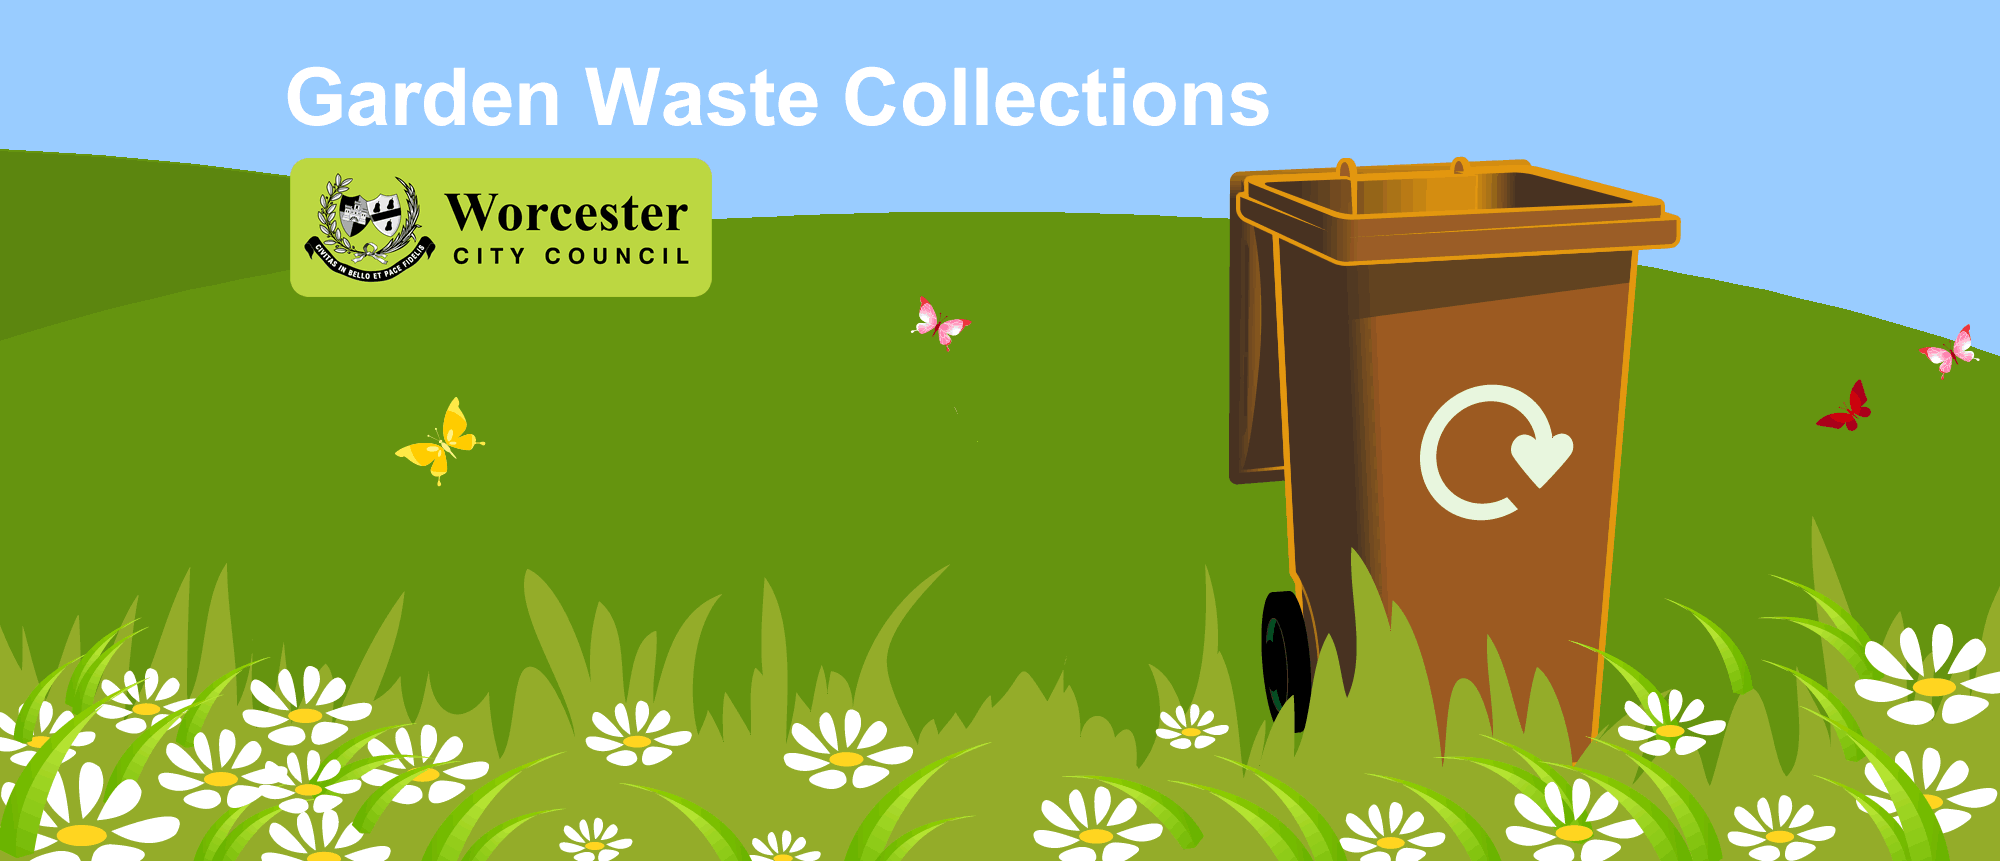 Garden Waste Collections Graphic